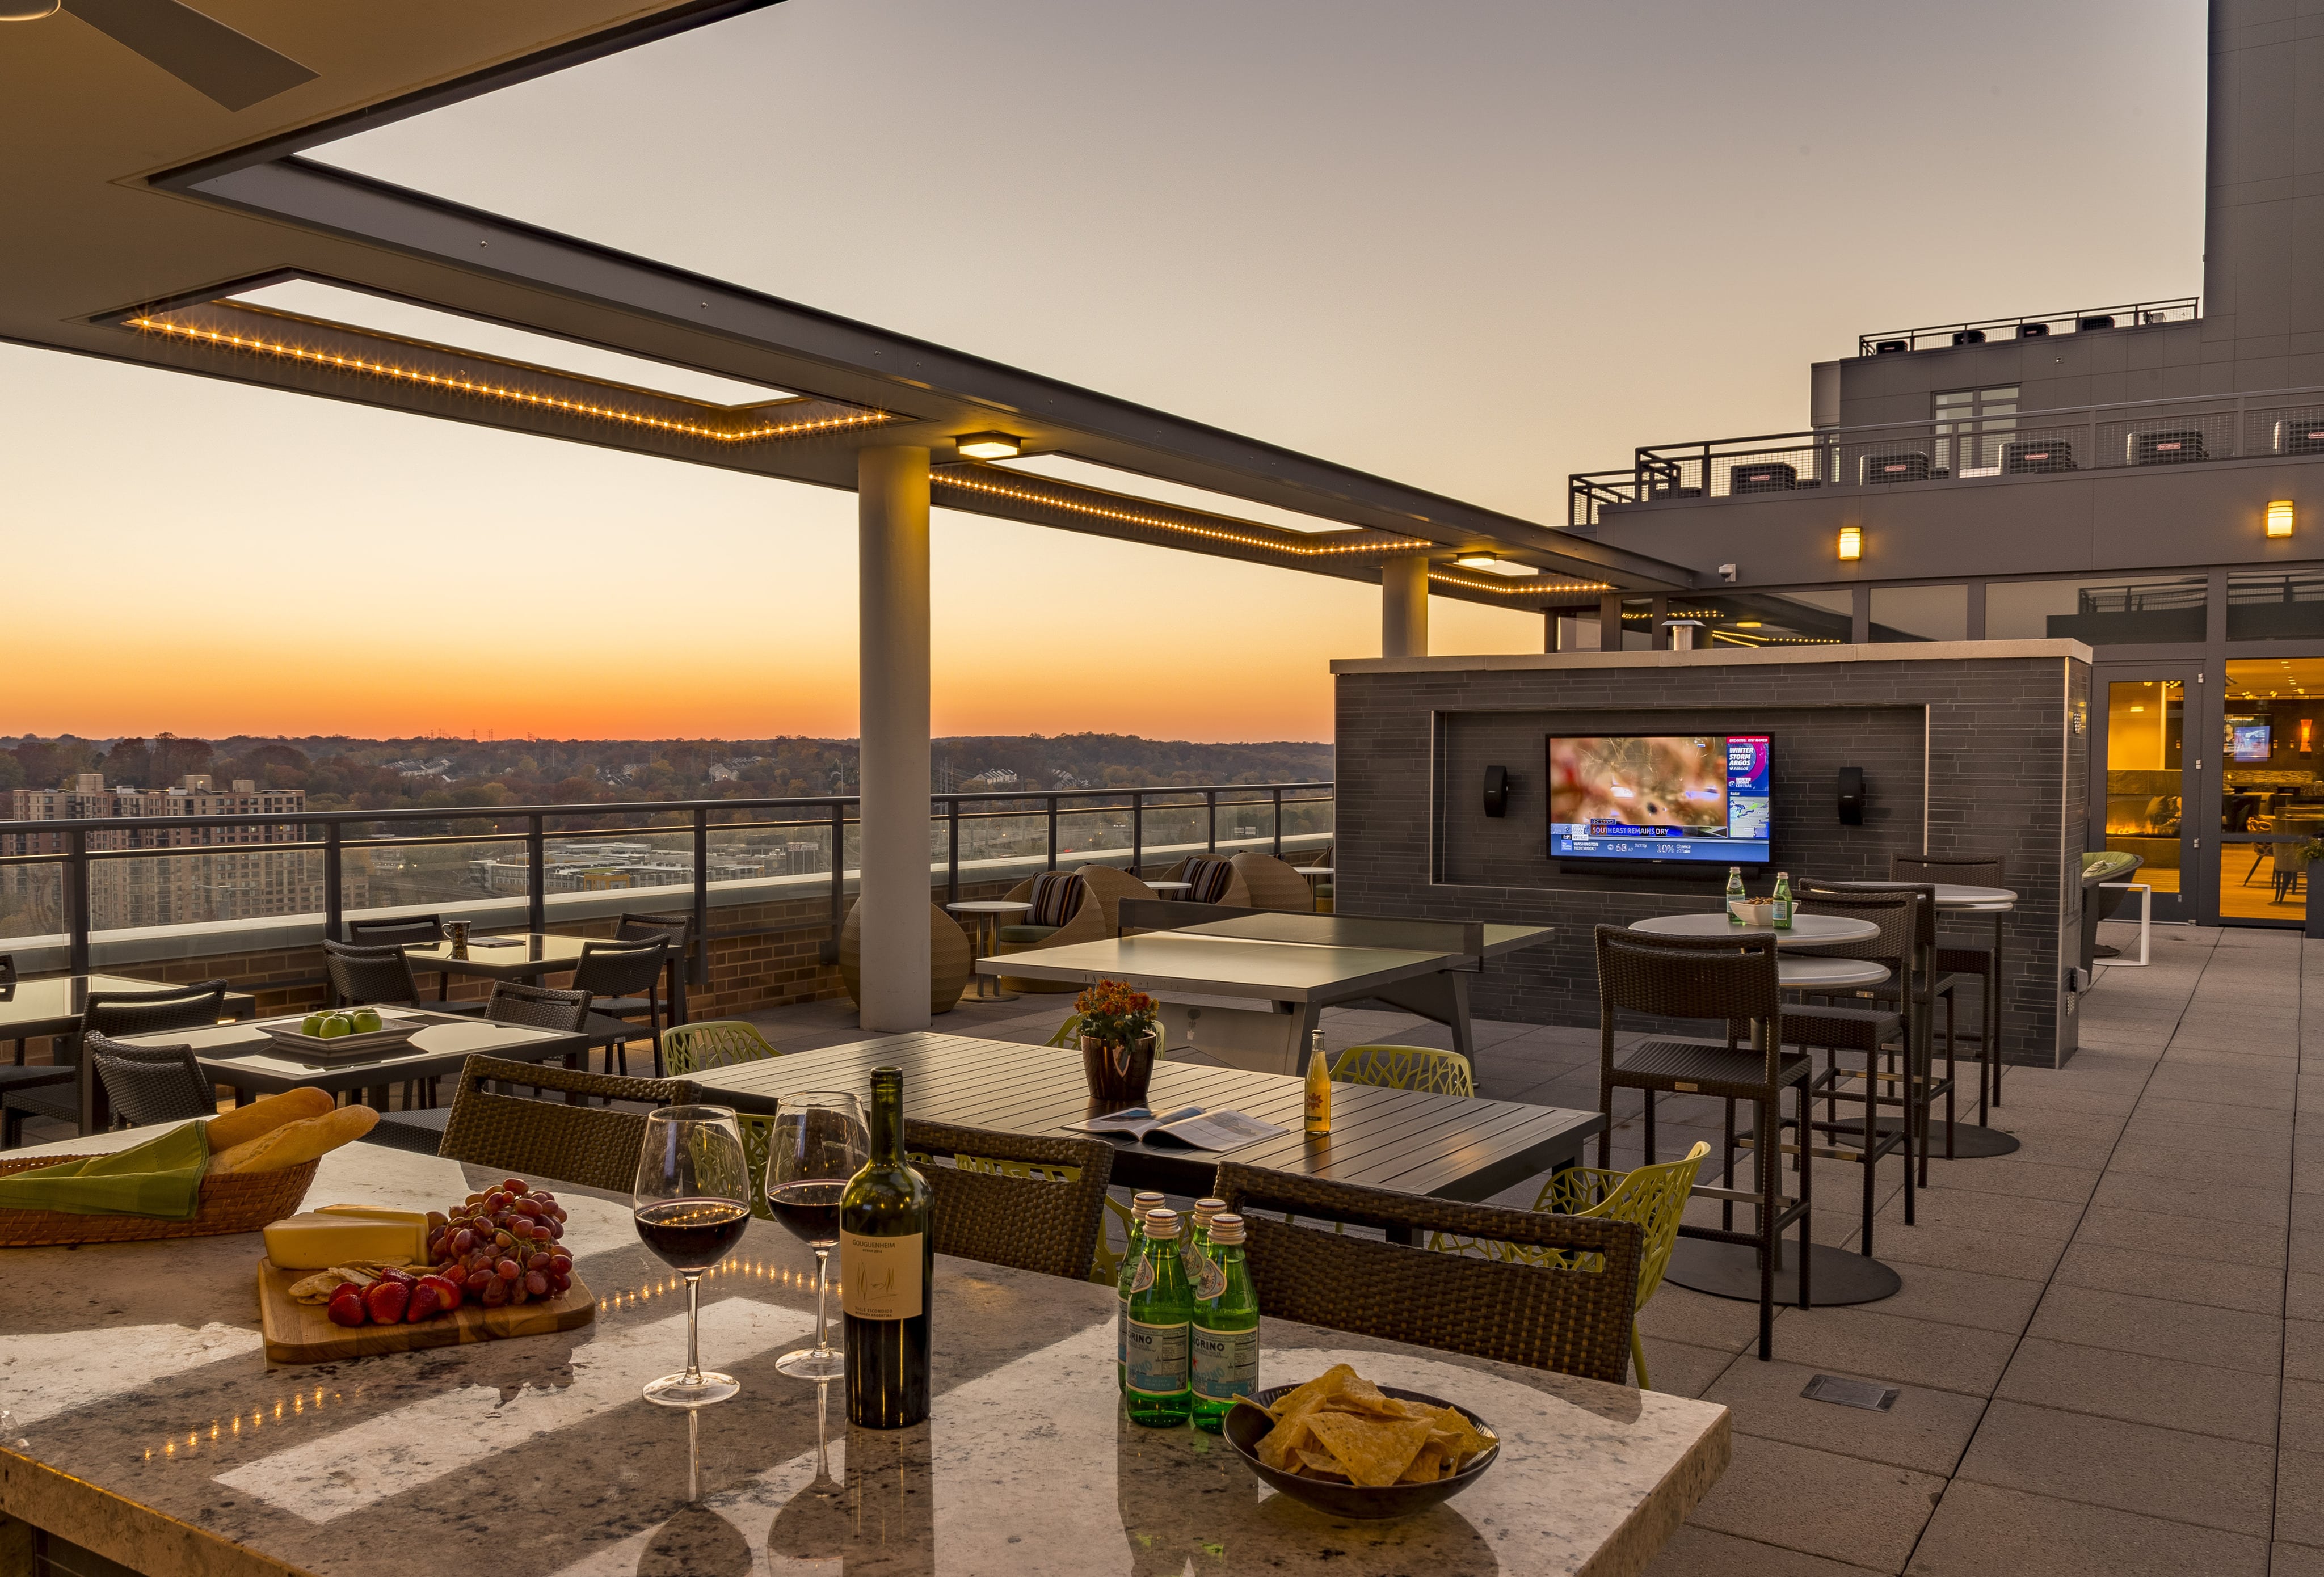 Norstone Lynia Basalt Interlocking Tile used on a focal wall in an upscale rooftop lounge in Washington, D.C.